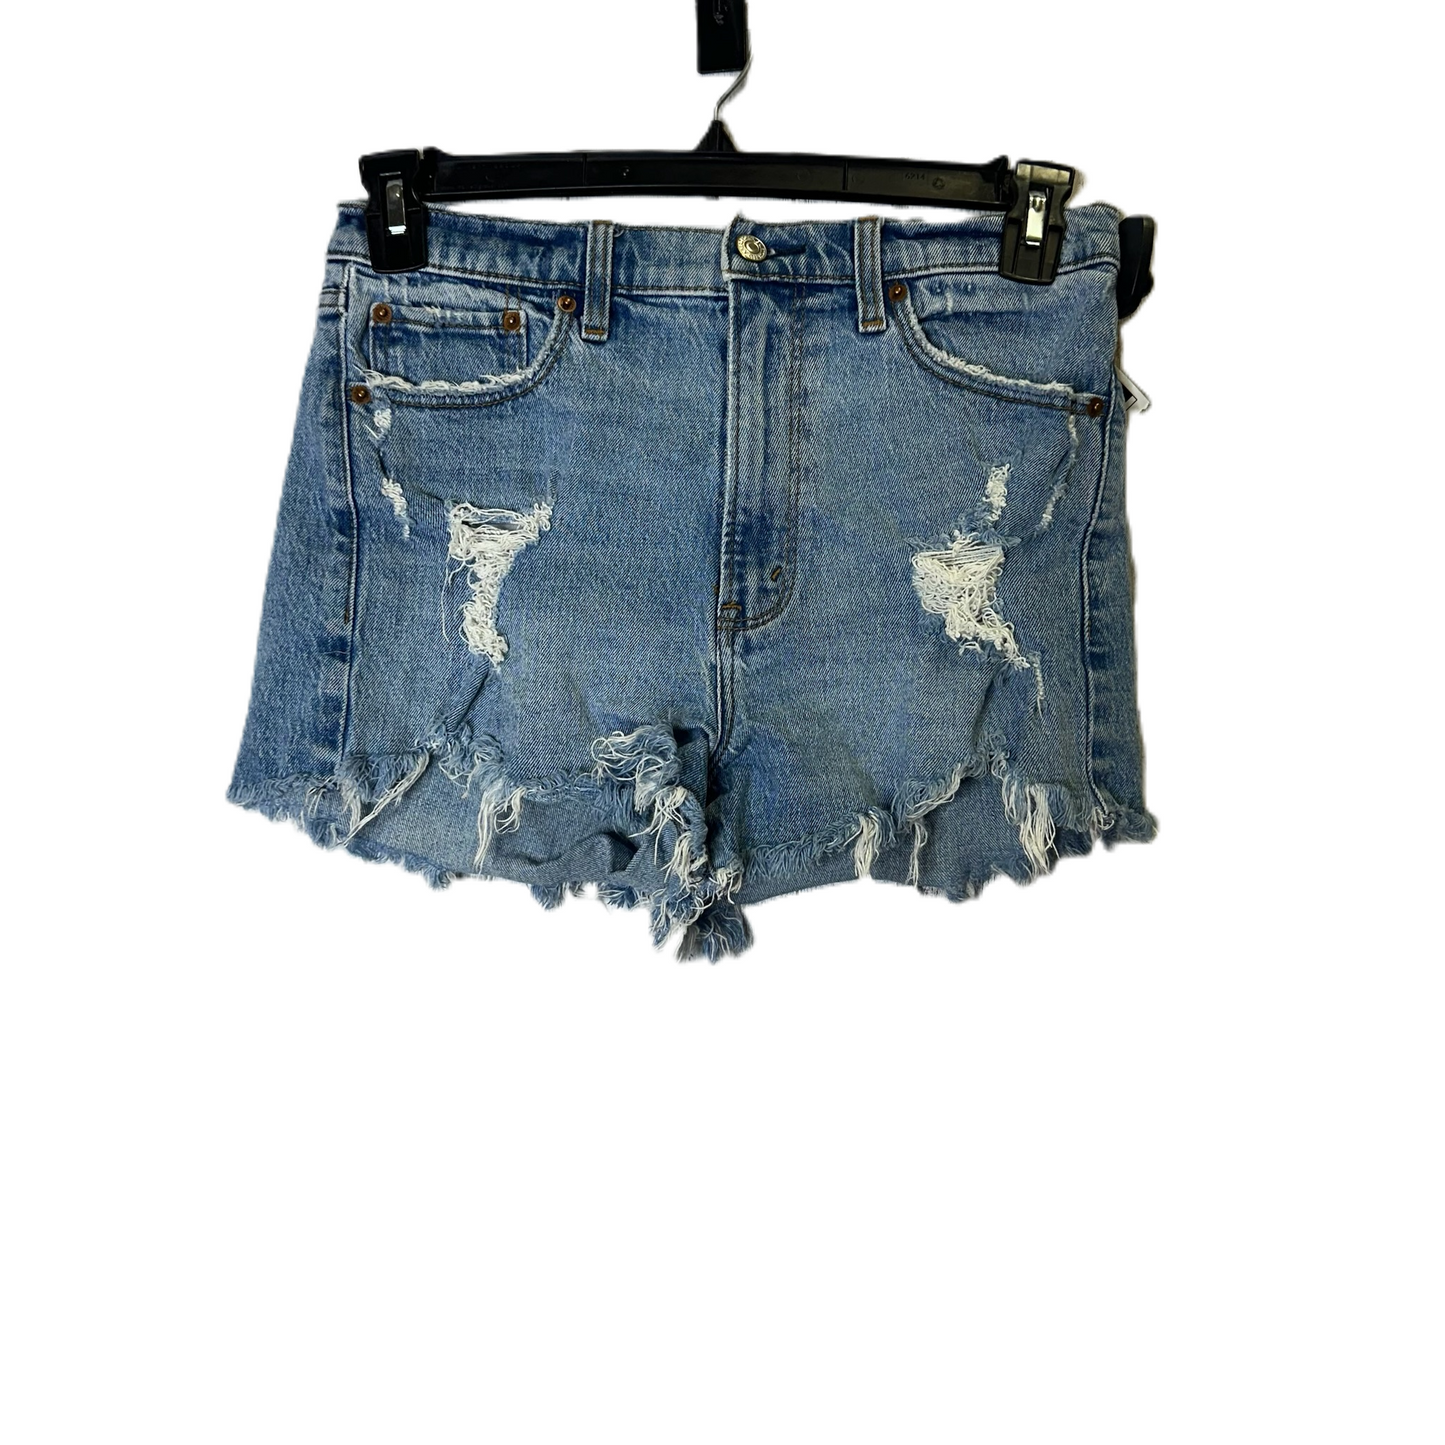 Blue Denim Shorts By Abercrombie And Fitch, Size: 8